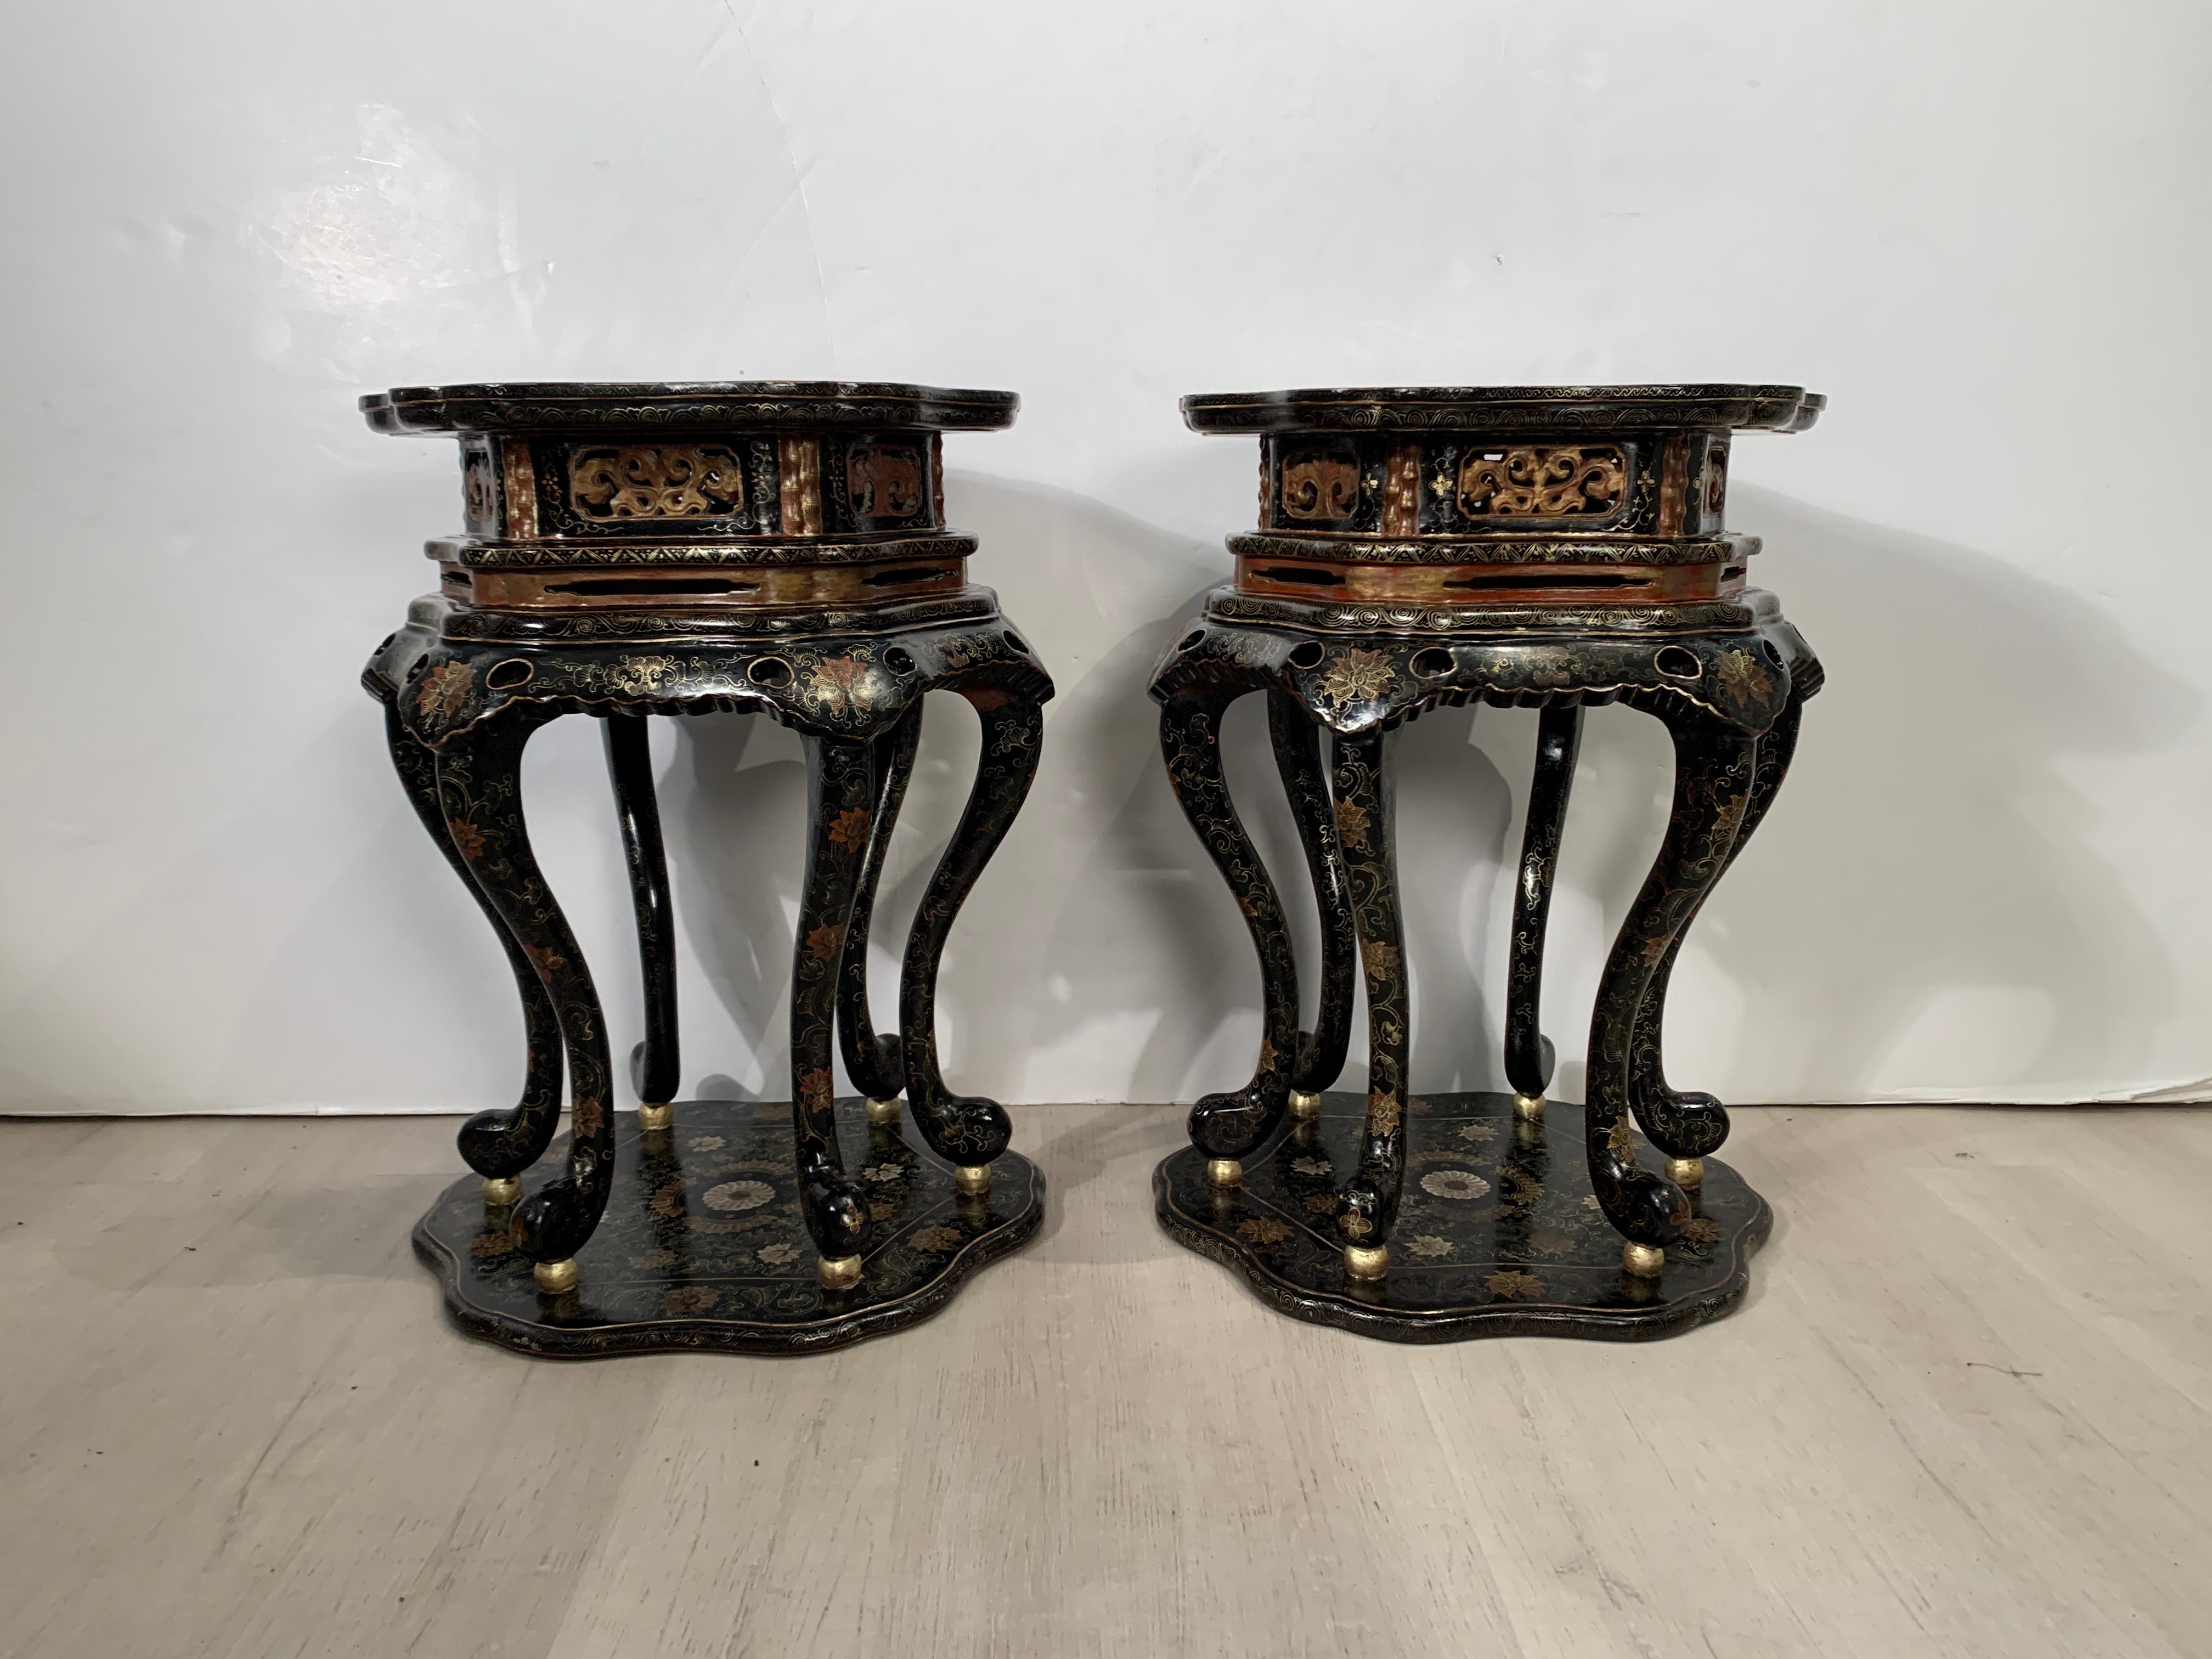 A stunning and elegant pair of vintage Chinese export black lacquer tall side tables with gilt and polychrome decoration, mid 20th century, Southern China or Hong Kong. 

The tall side tables are modeled after traditional Chinese incense stands,